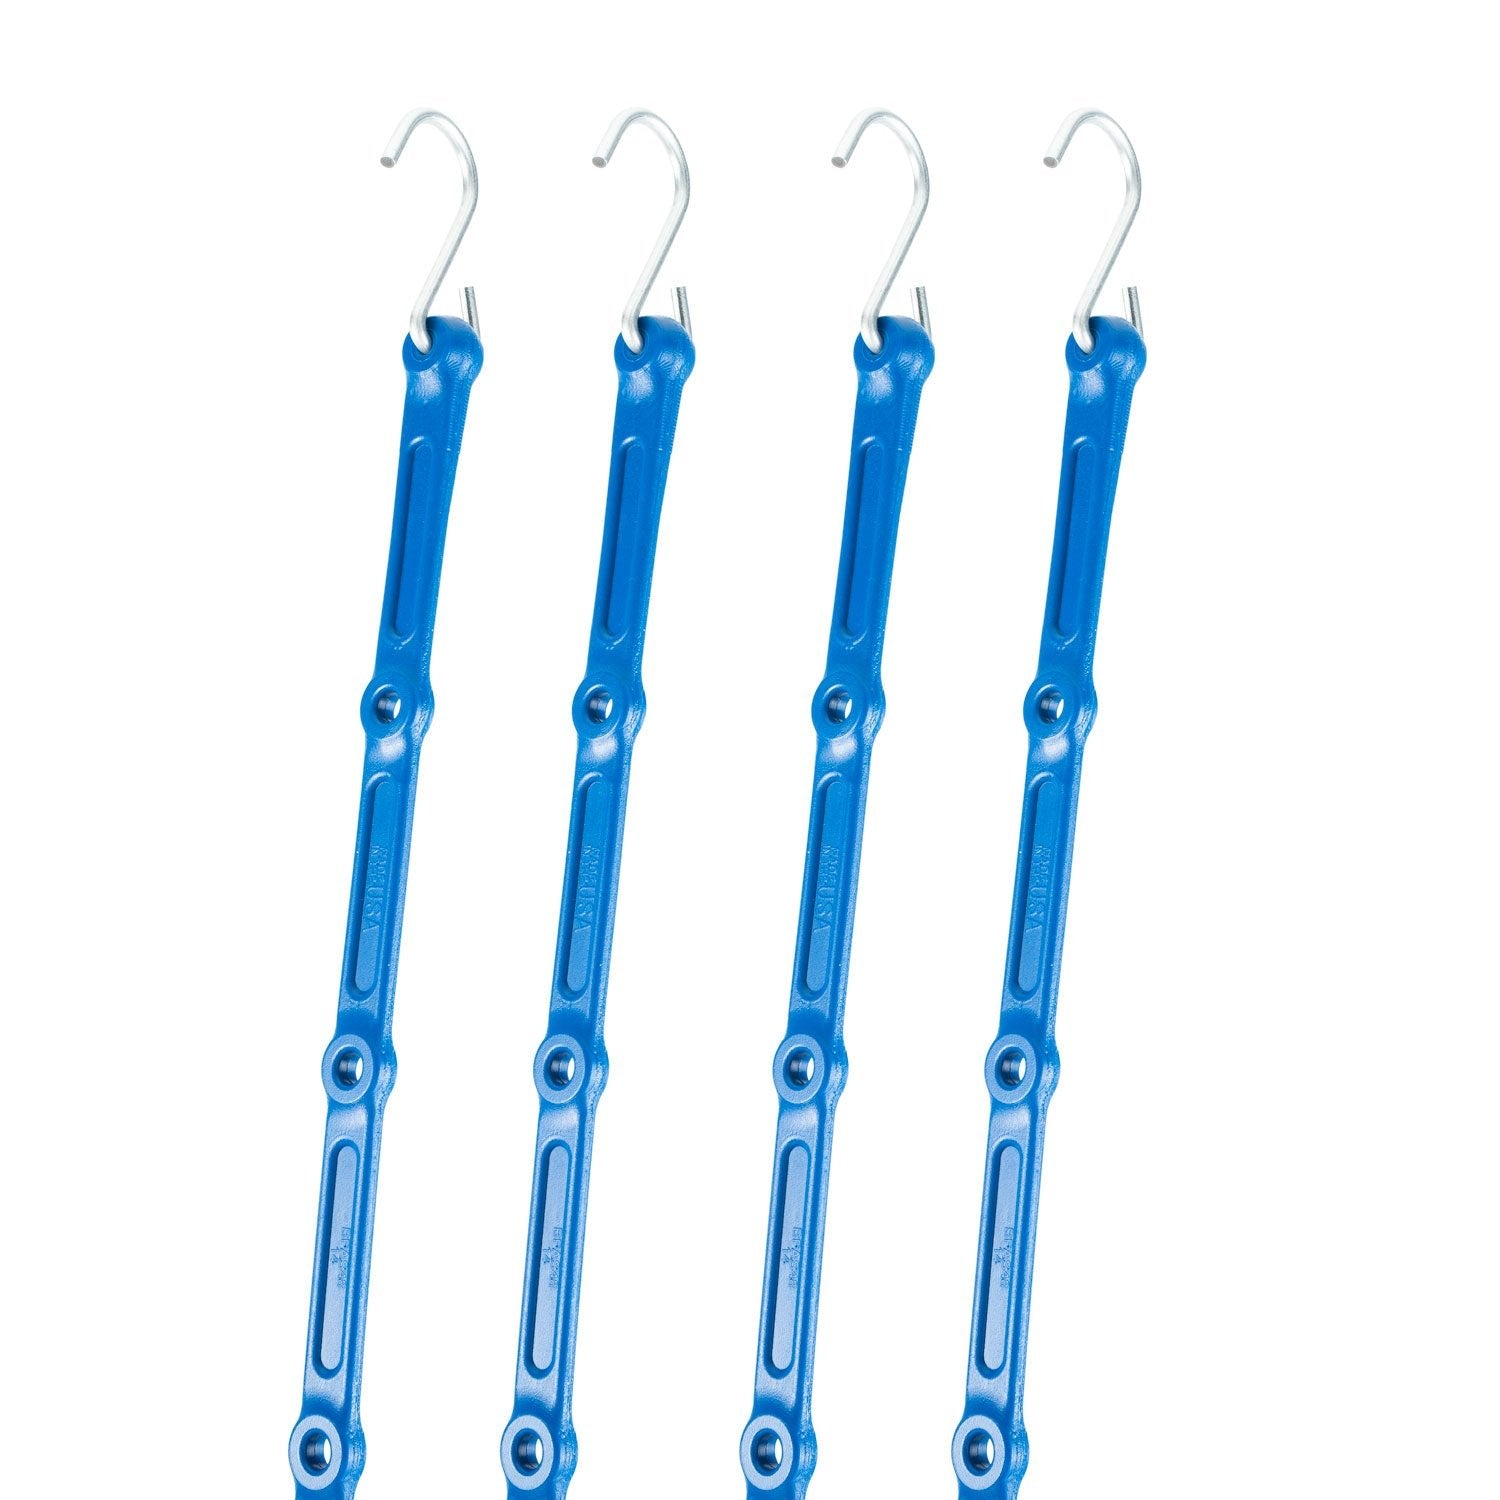 The Perfect Bungee Adjust-A-Strap Blue Adjustable Bungee Cords (4